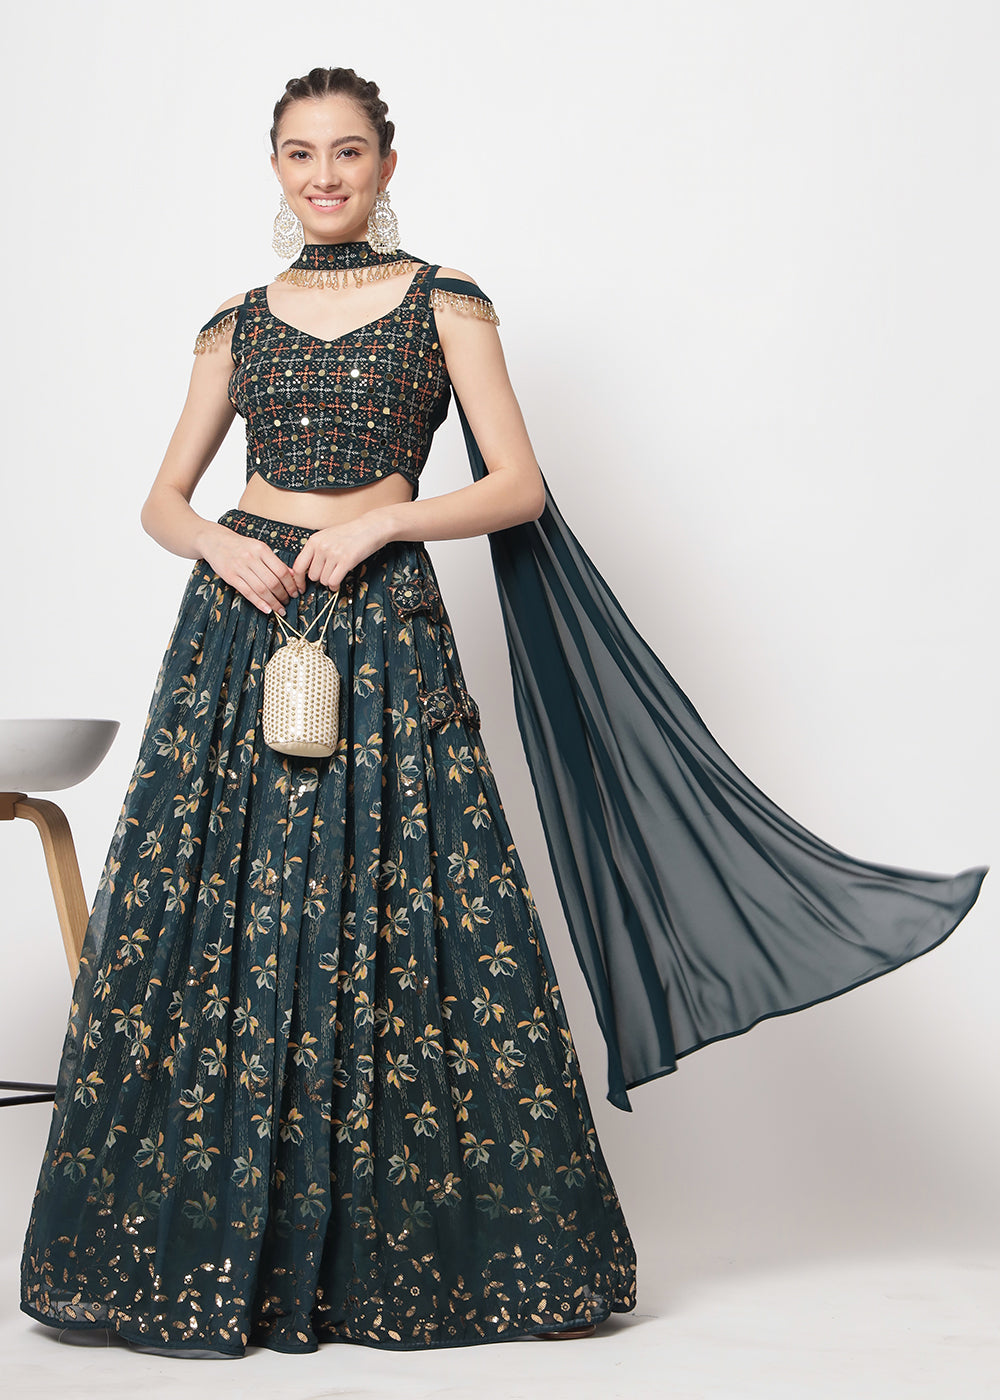 Buy Now Georgette Green Sequins & Printed Wedding Party Lehenga Choli Online in USA, UK, Canada & Worldwide at Empress Clothing. 